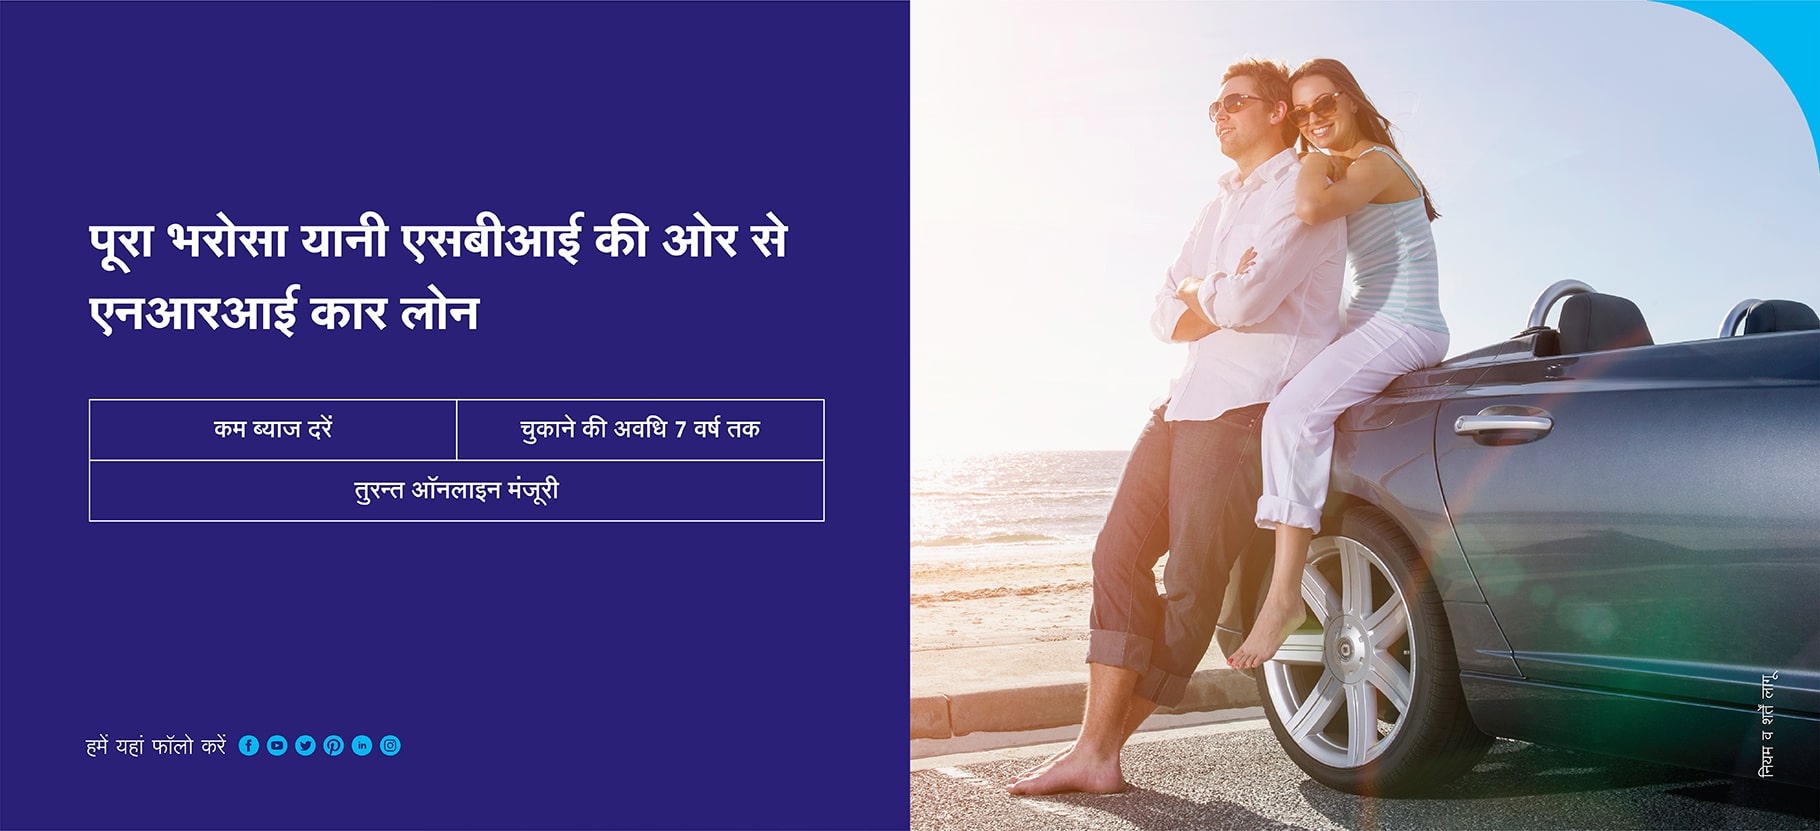 Total reliability is an NRI car loan from sbi